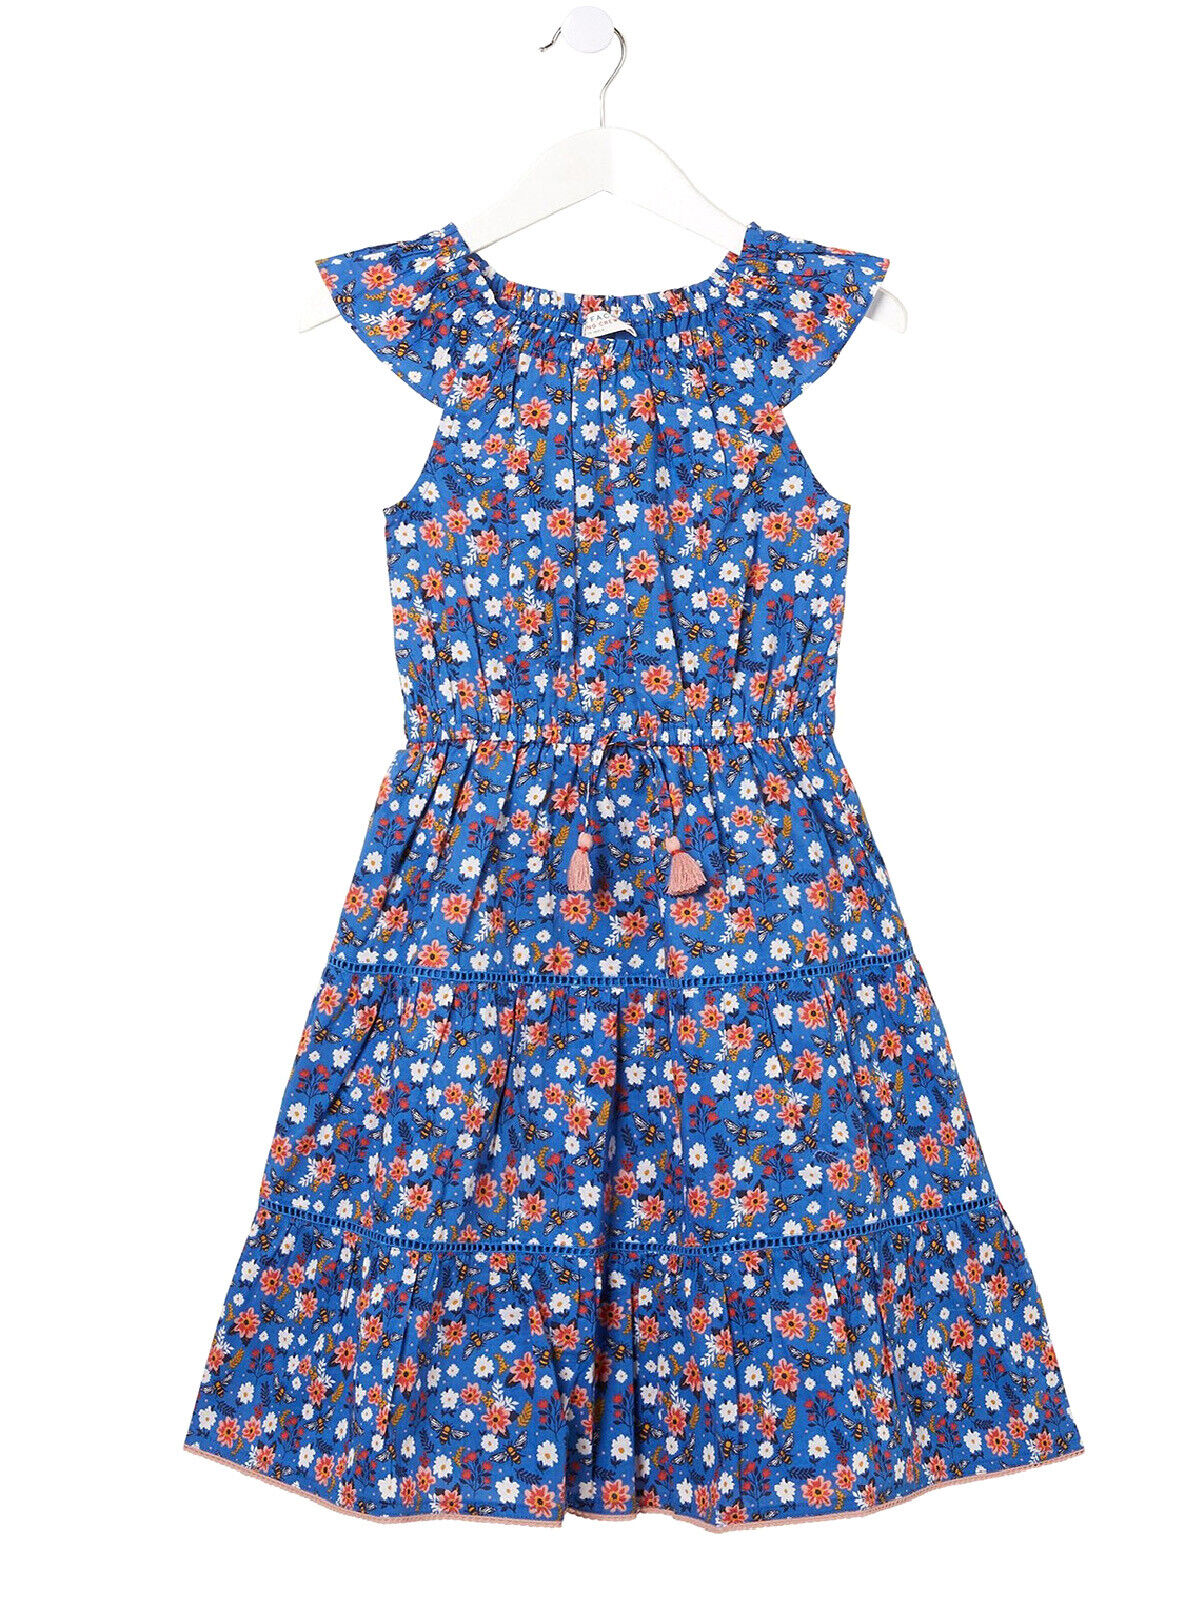 EX Fat Face Cobalt Girls Ruby Bee Print Maxi Dress 3-4 or 4-5 Years RRP £22.50